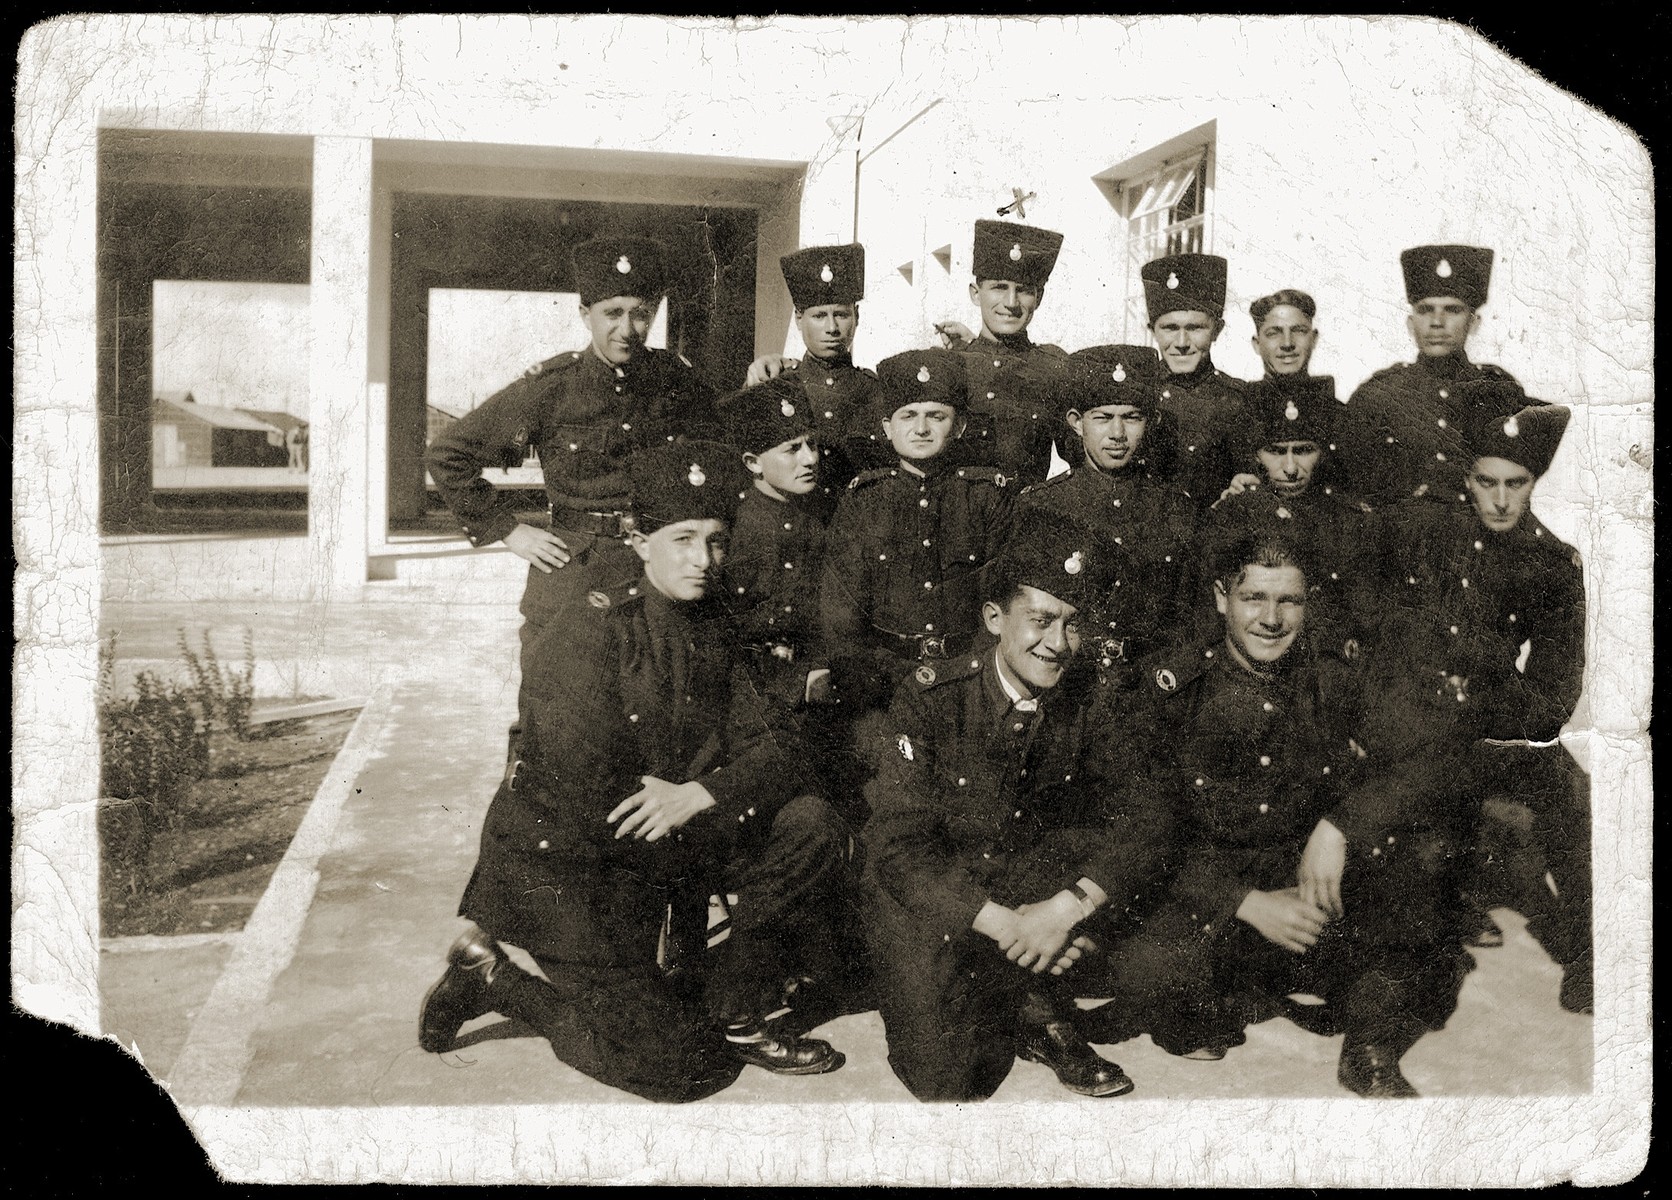 Group portrait of members of the British mandate police force in Haifa.  

Among those pictured is Mordechai Schwarcz.